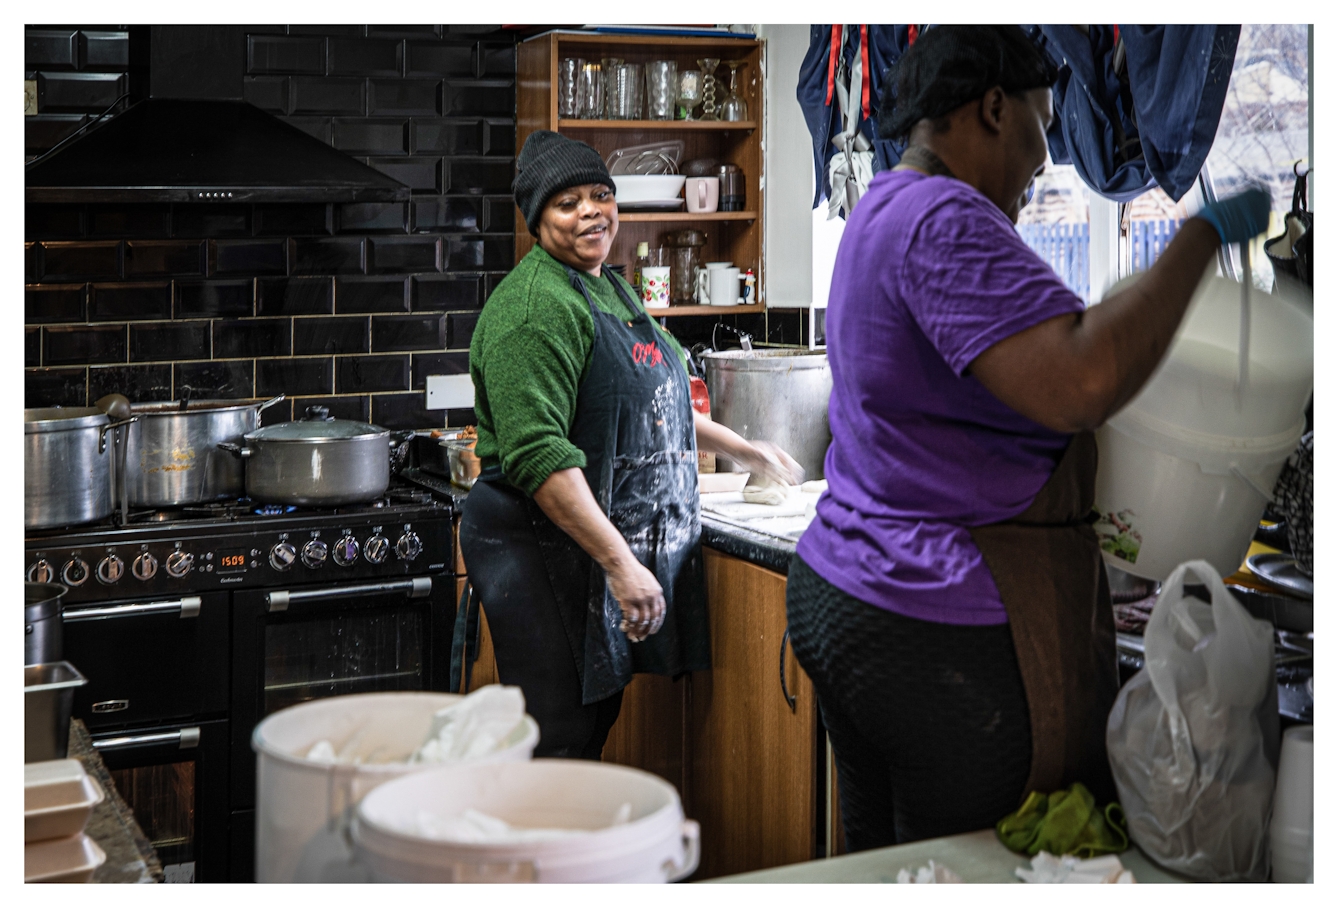 Photograph of a kitchen scene where cooking on a large scale is taking place. The stove is covered in large pots and pans. Two Black women are working in the kitchen, smiling and joking as they work.